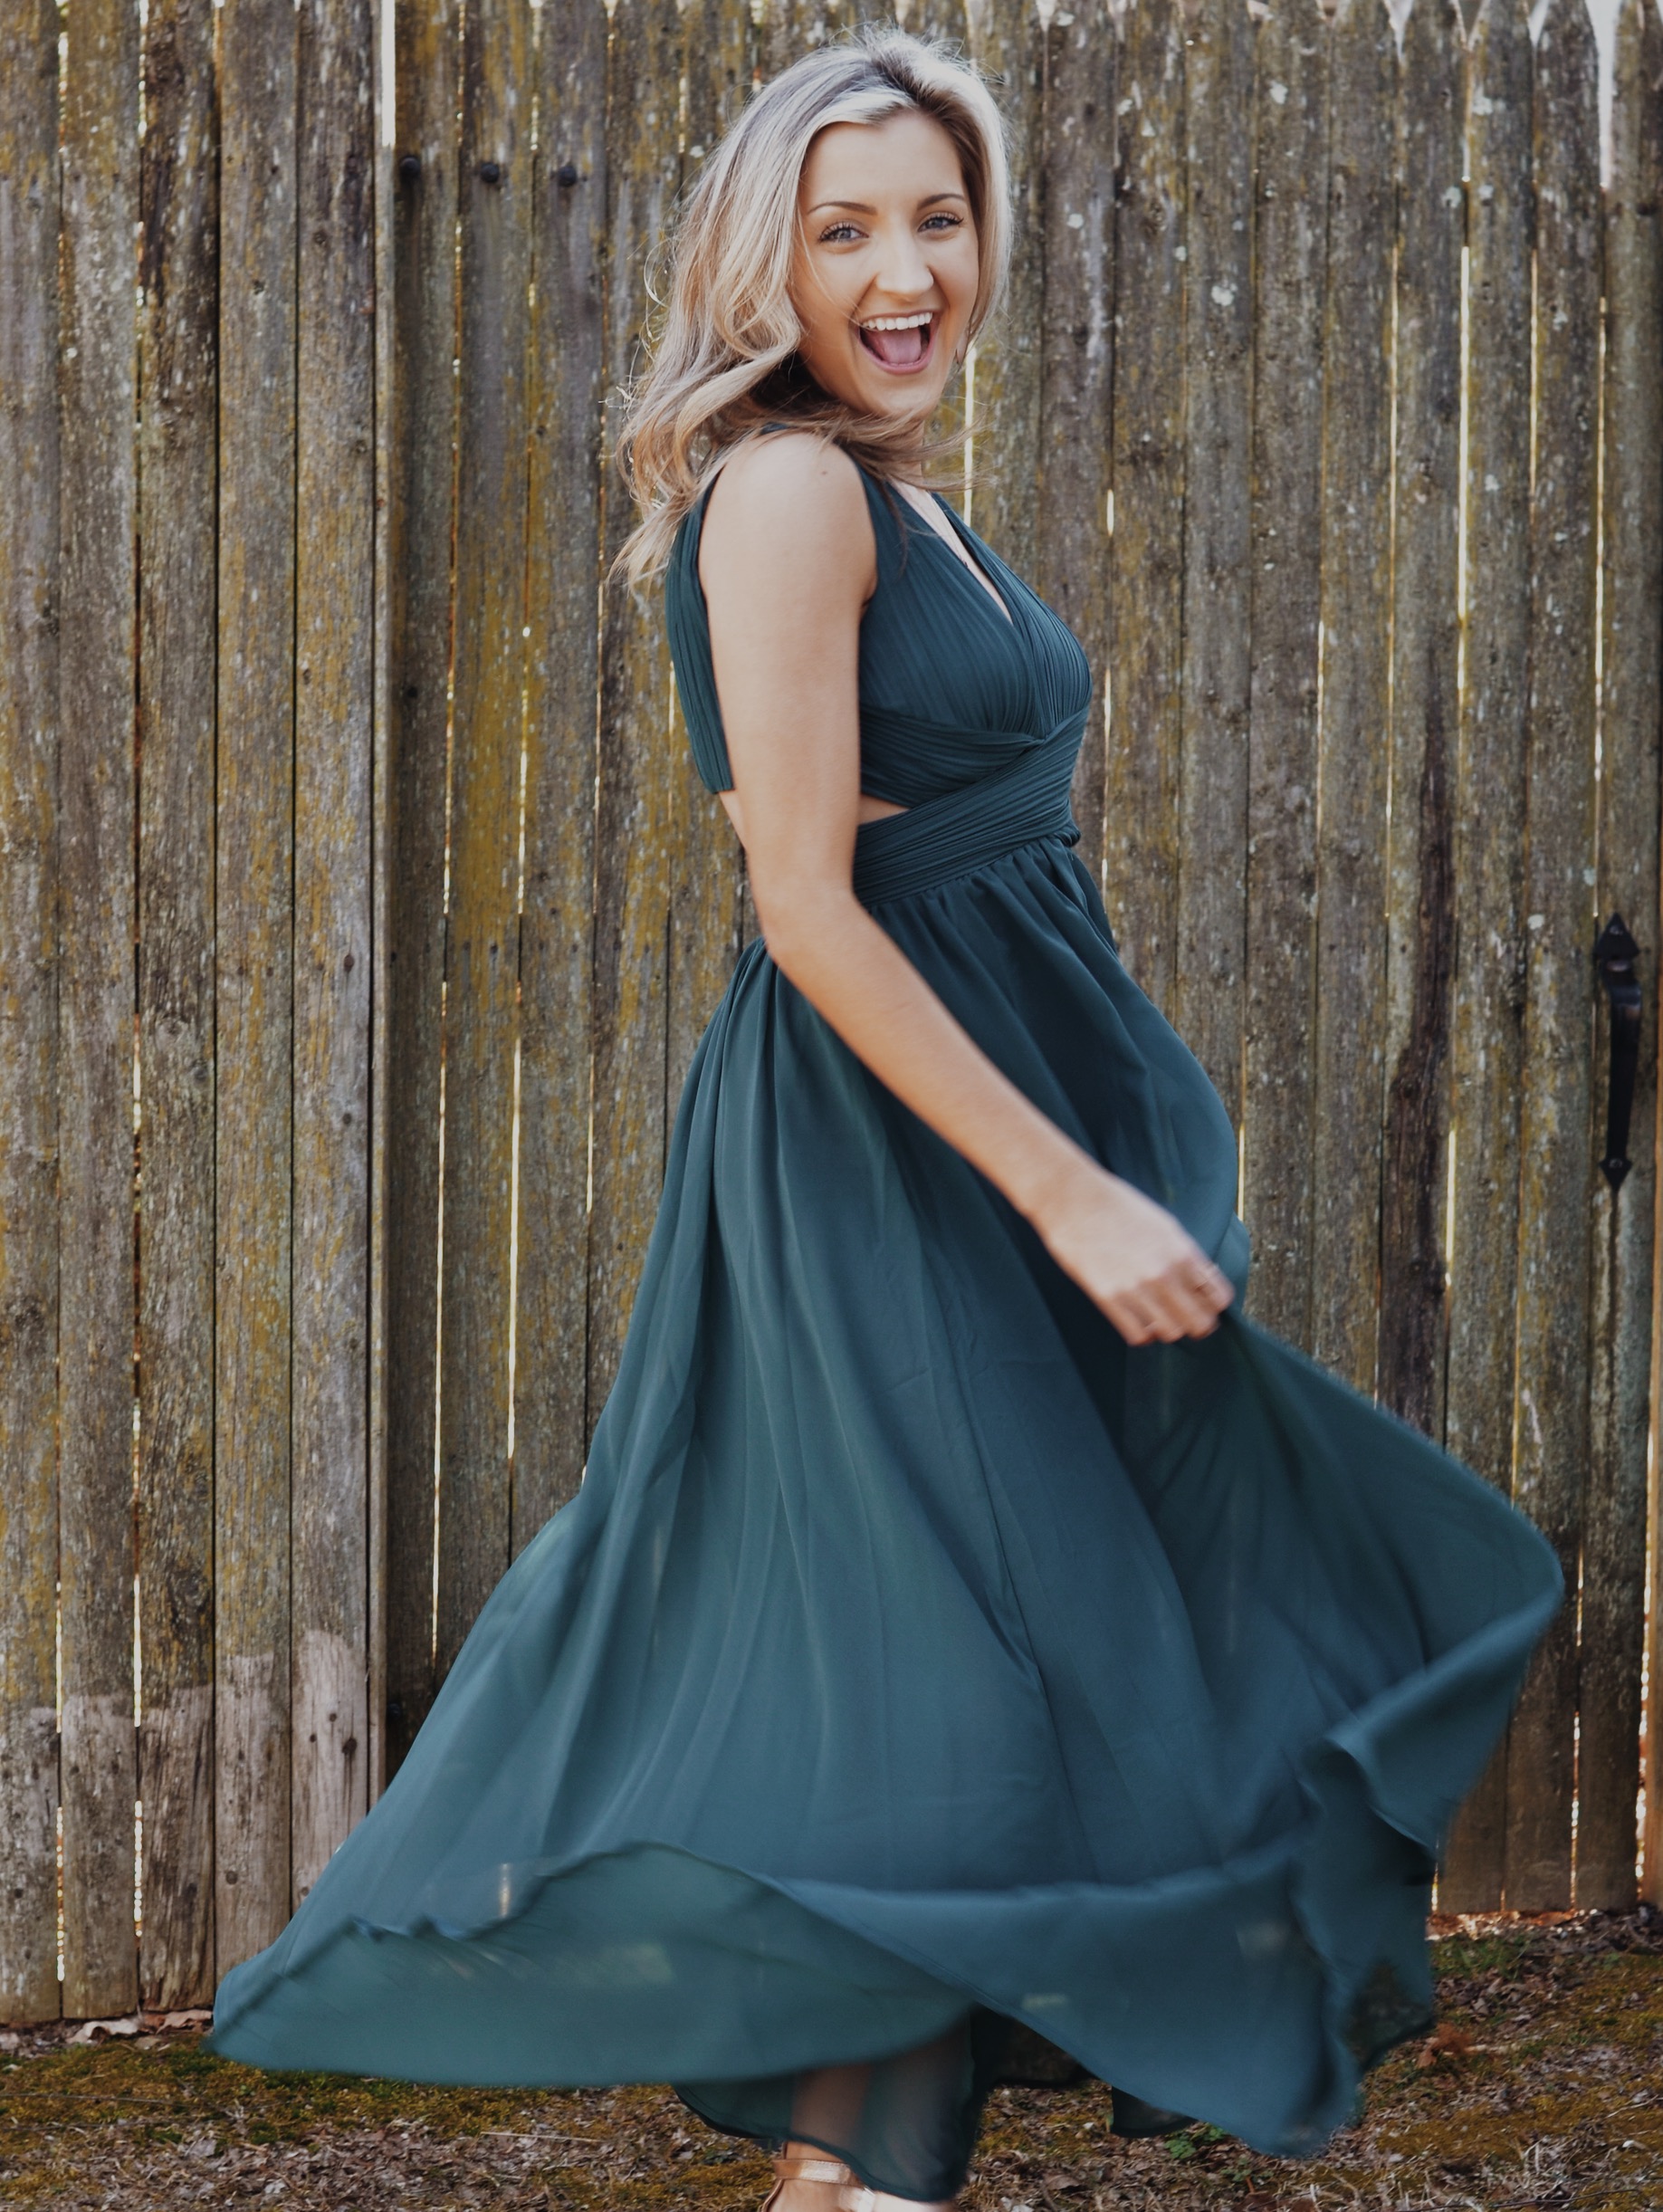 Prom Season With SheIn $30 Dresses